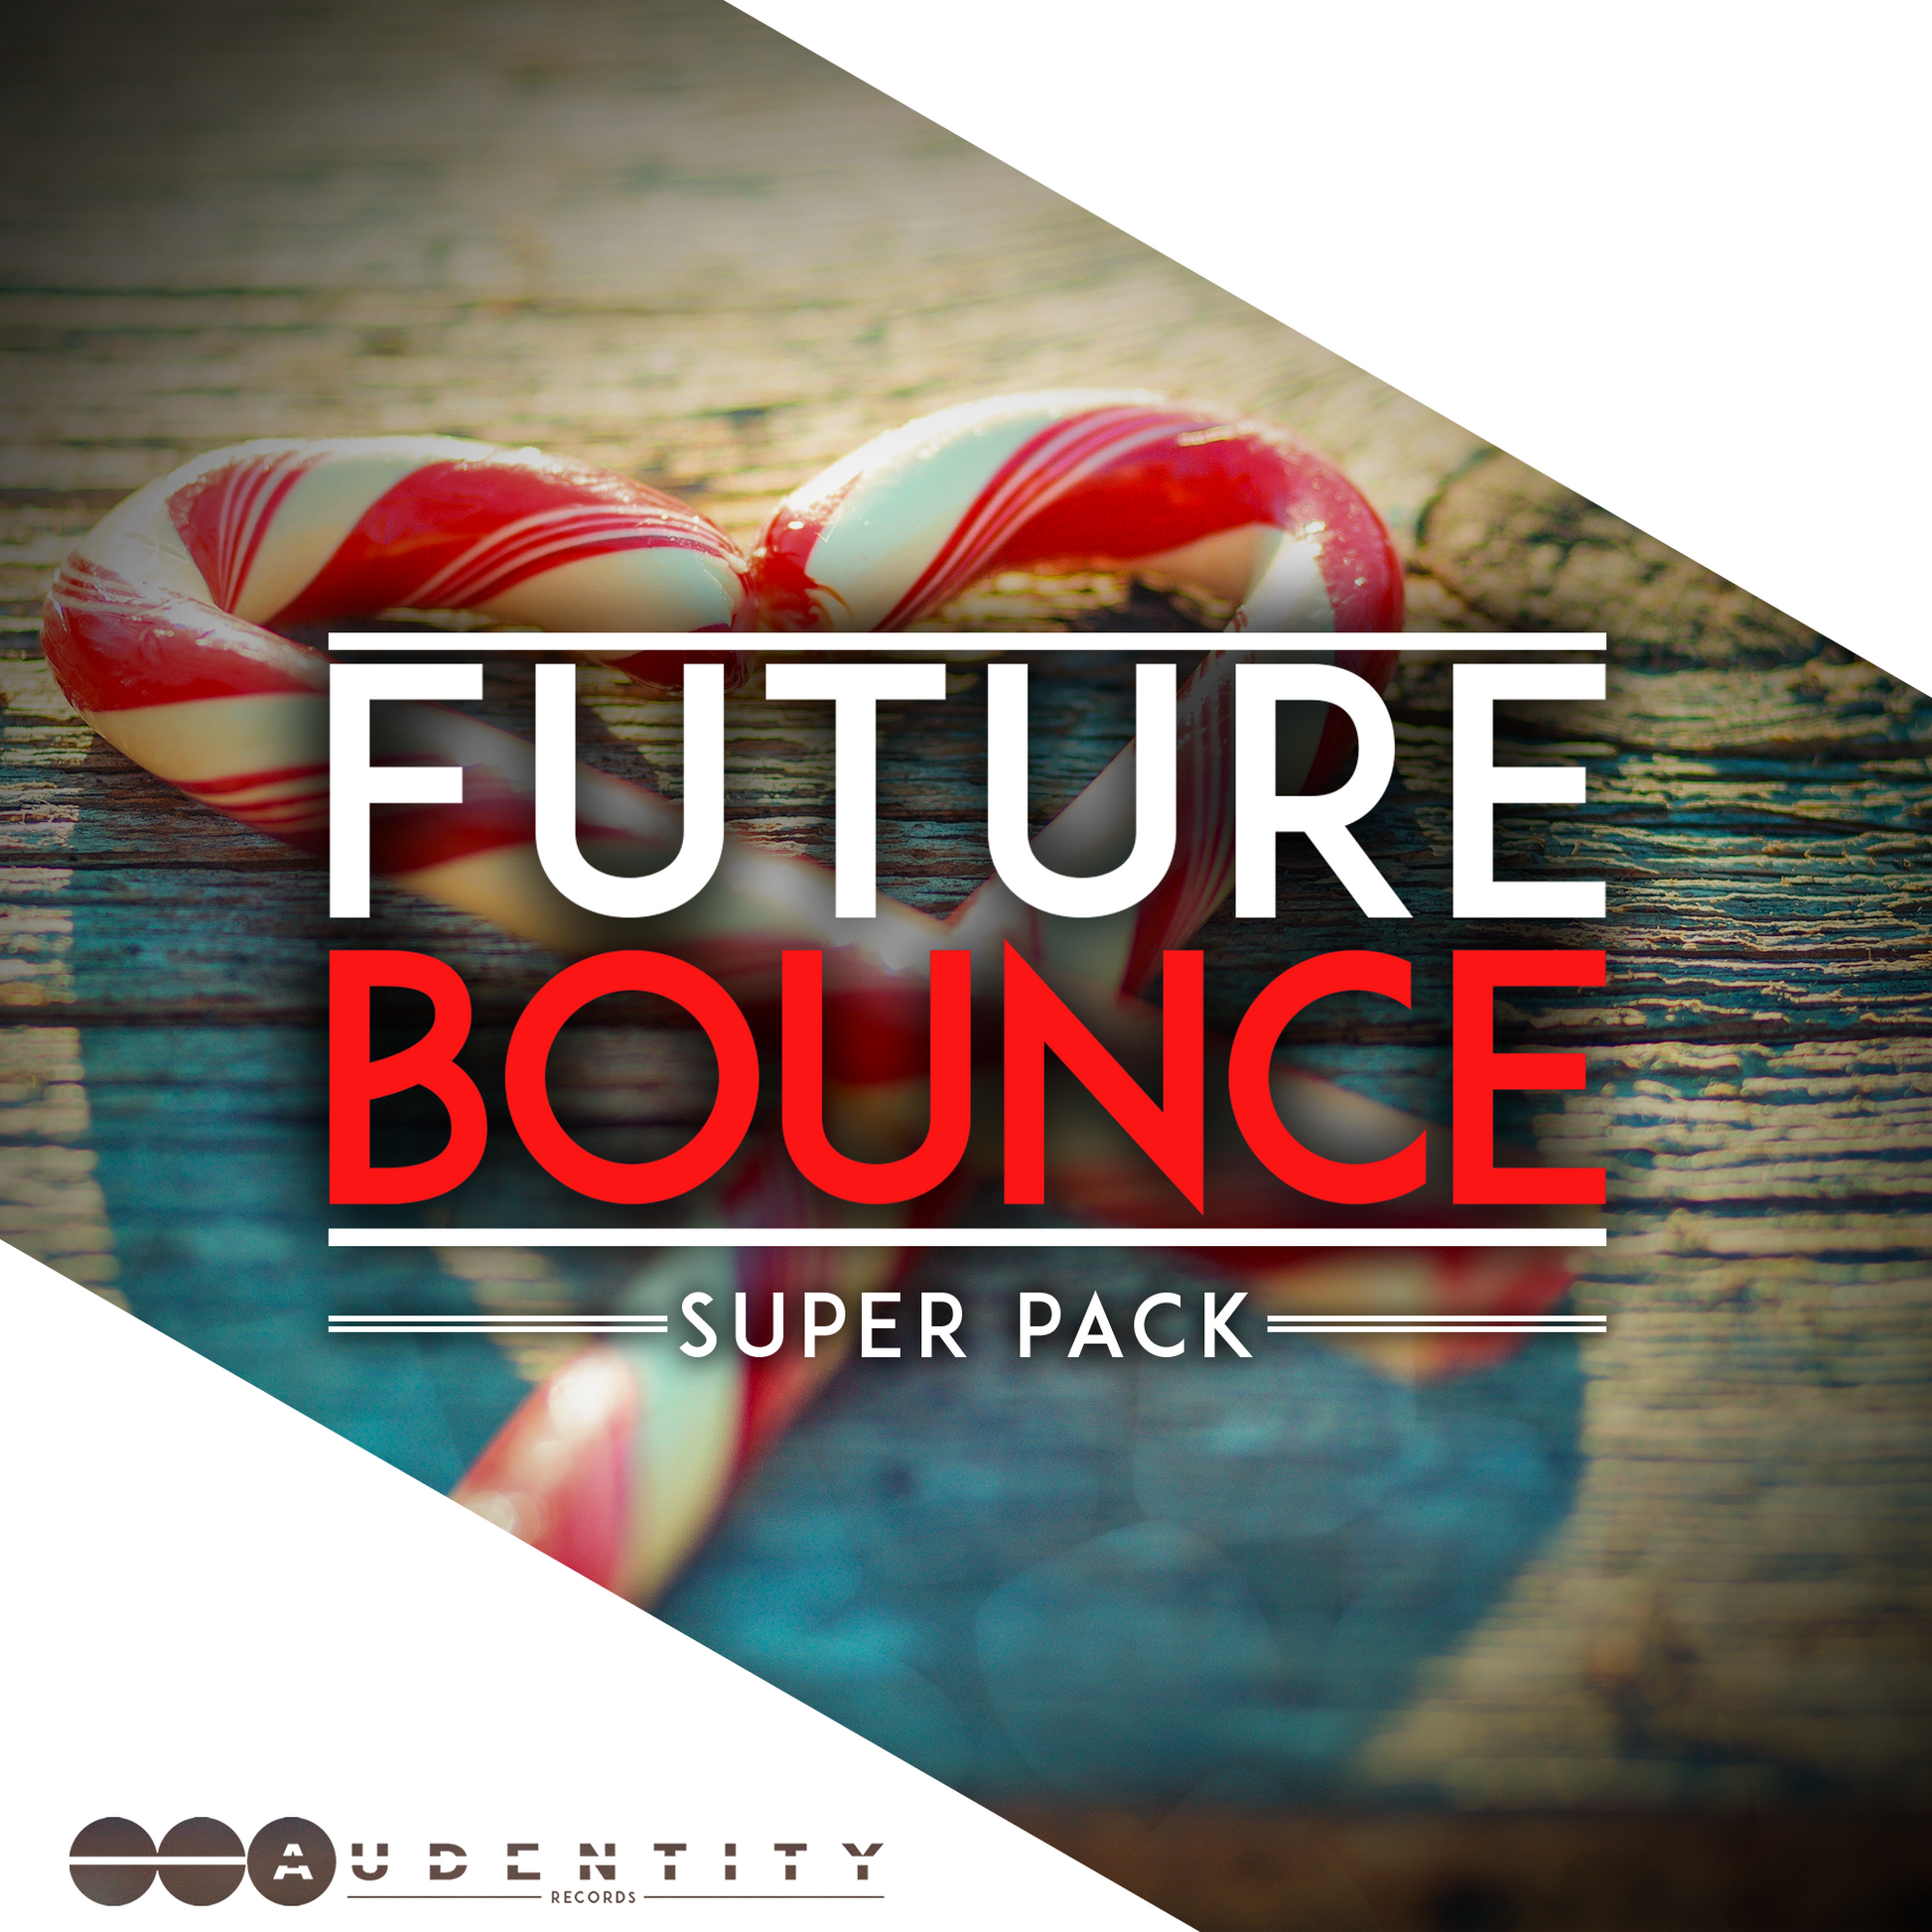 Future Bounce Superpack